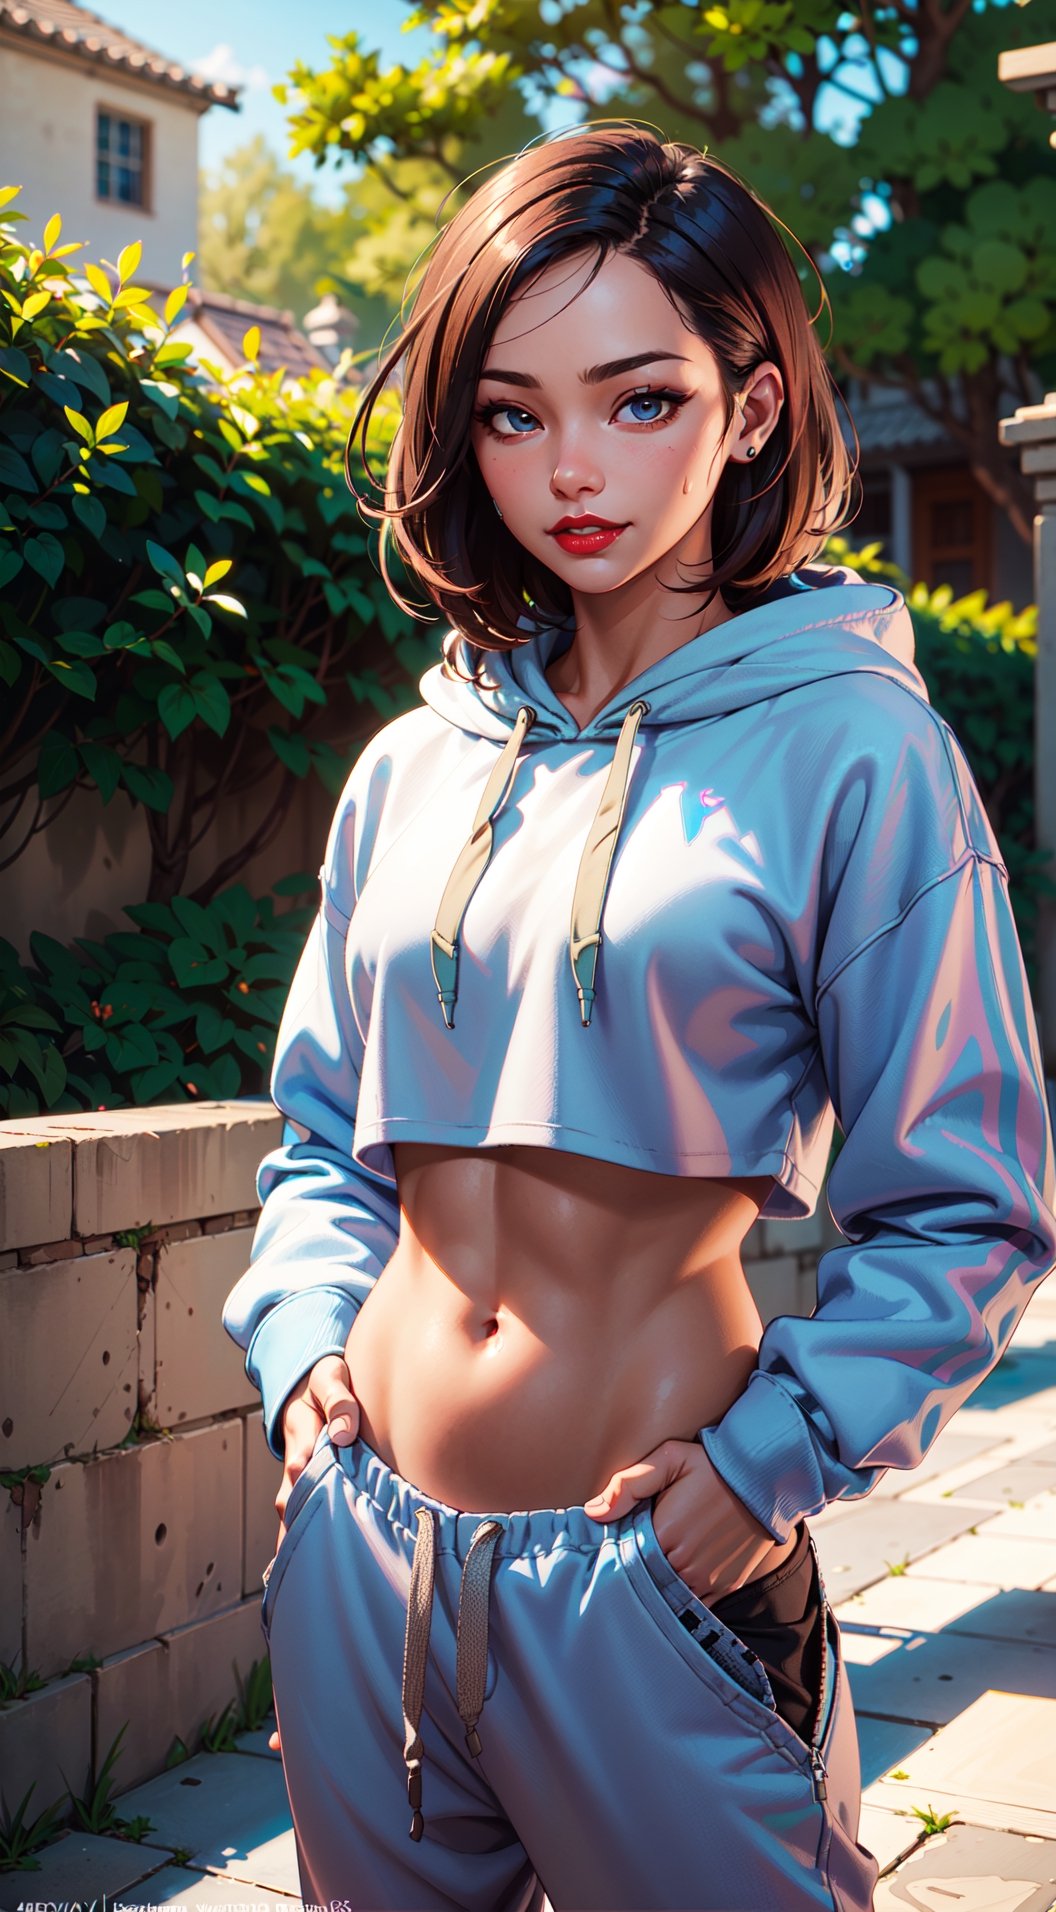 1 girl, beautiful Korean girl, (Cute Loose Bob hair), (wearing a cropped hoodie, capri sweatpants:1.5), (hands in pockets:1.5), (red lips:1.3), (small breasts:1.3), (toned stomach:1.3), (eyelashes:1.2), (aegyo sal:1.2), beautiful detailed eyes, symmetrical eyes, (detailed face), immersive background, volumetric haze, global illumination, soft lighting, (flowing hair), (bright smile), natural lighting, (realistic:1.5), (lifelike:1.4), (4k, digital art, masterpiece), High detail digital painting, realistic, (top quality), (soft shadows), (best character art), ultra high resolution, highly detailed digital artwork, physically-based rendering, realism with an artistic touch, vibrant colors, f2.2 lens, soft palette, natural beauty